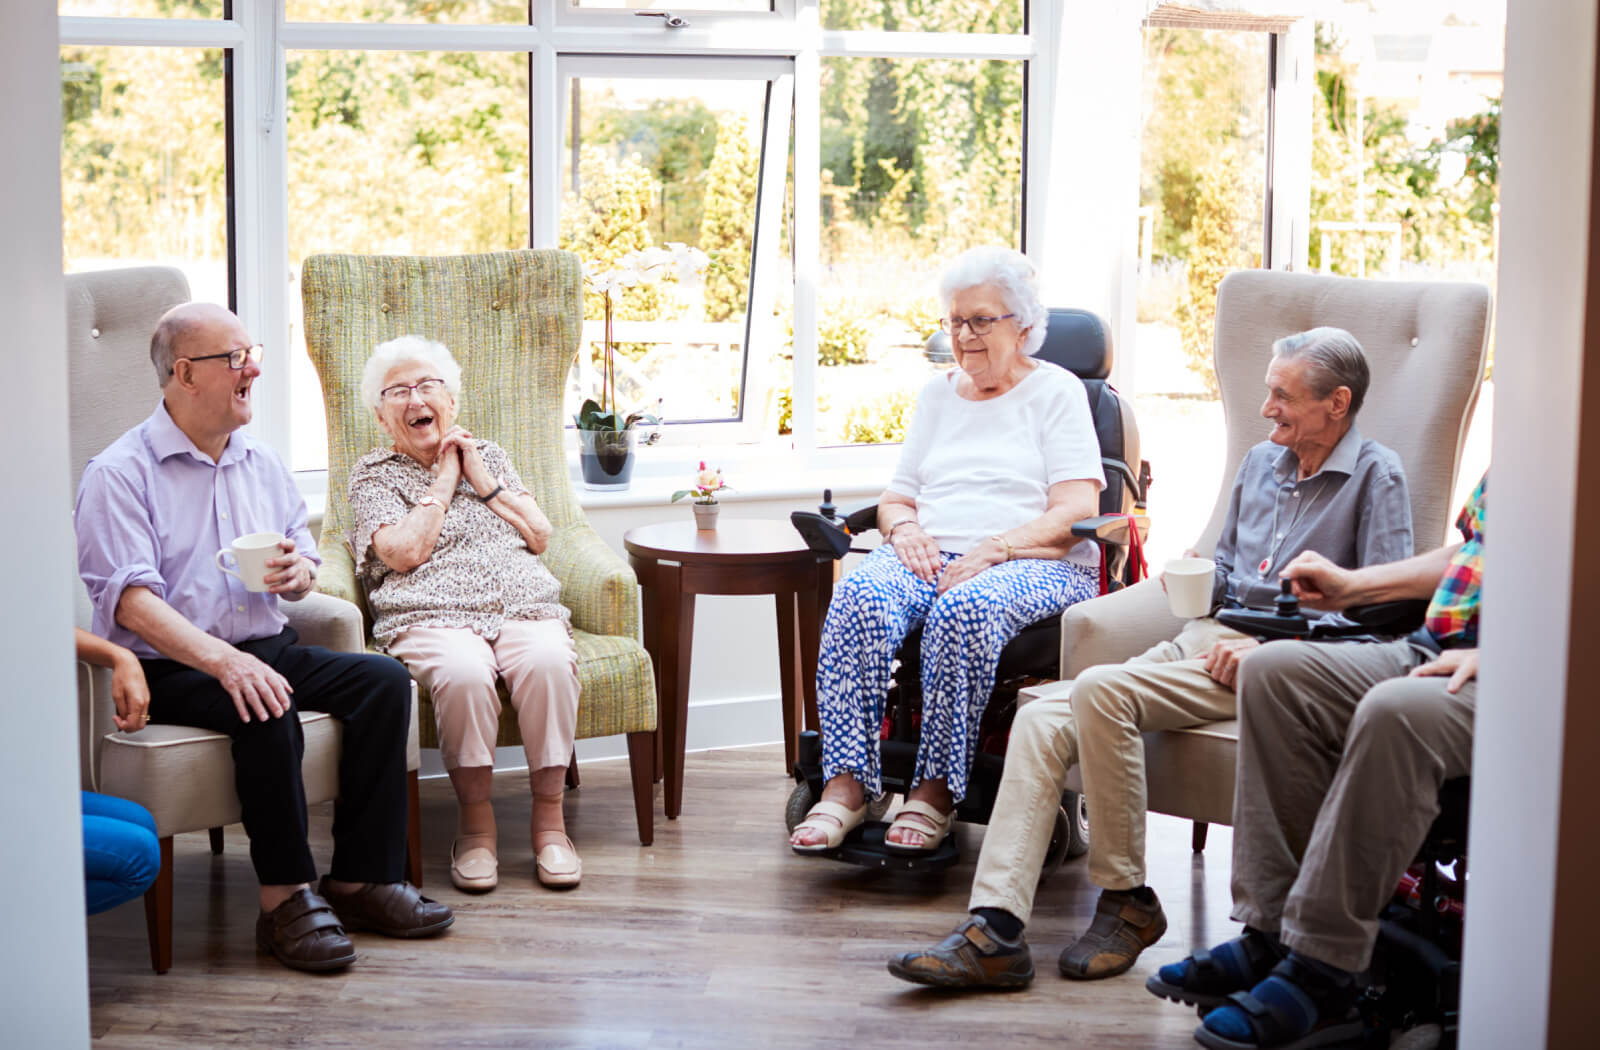 A group of seniors sitting in a semicircle in a common area, drinking tea or coffee and laughing.